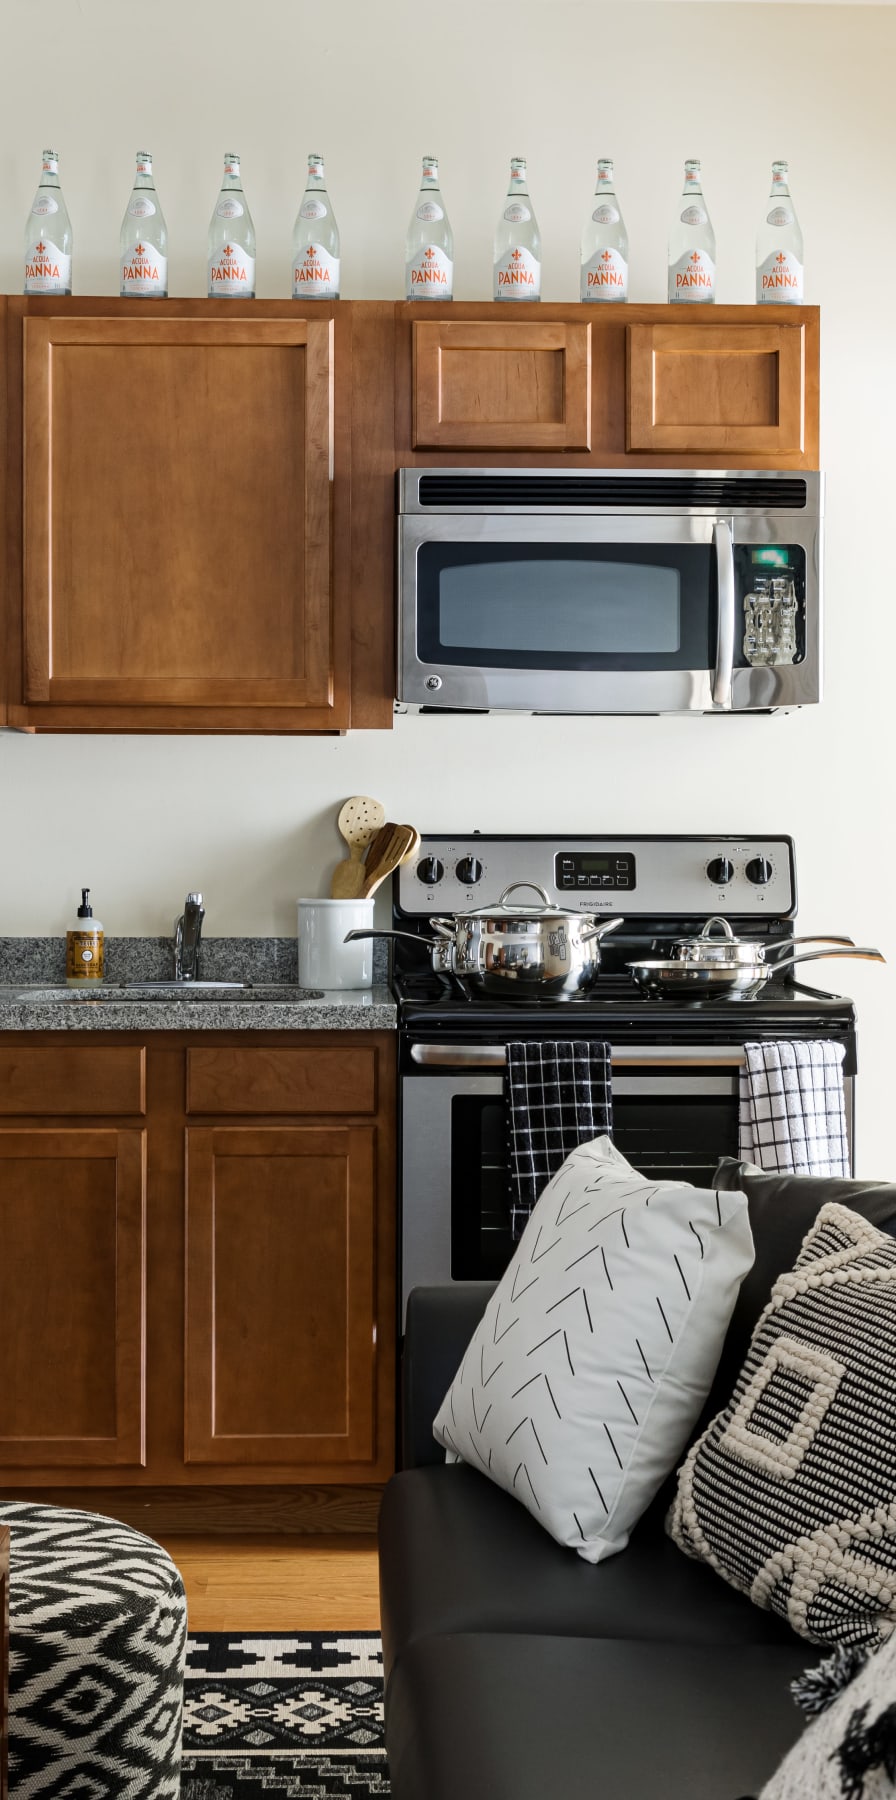 Modern kitchen in a model student apartment at 20 Hawley in Binghamton, New York